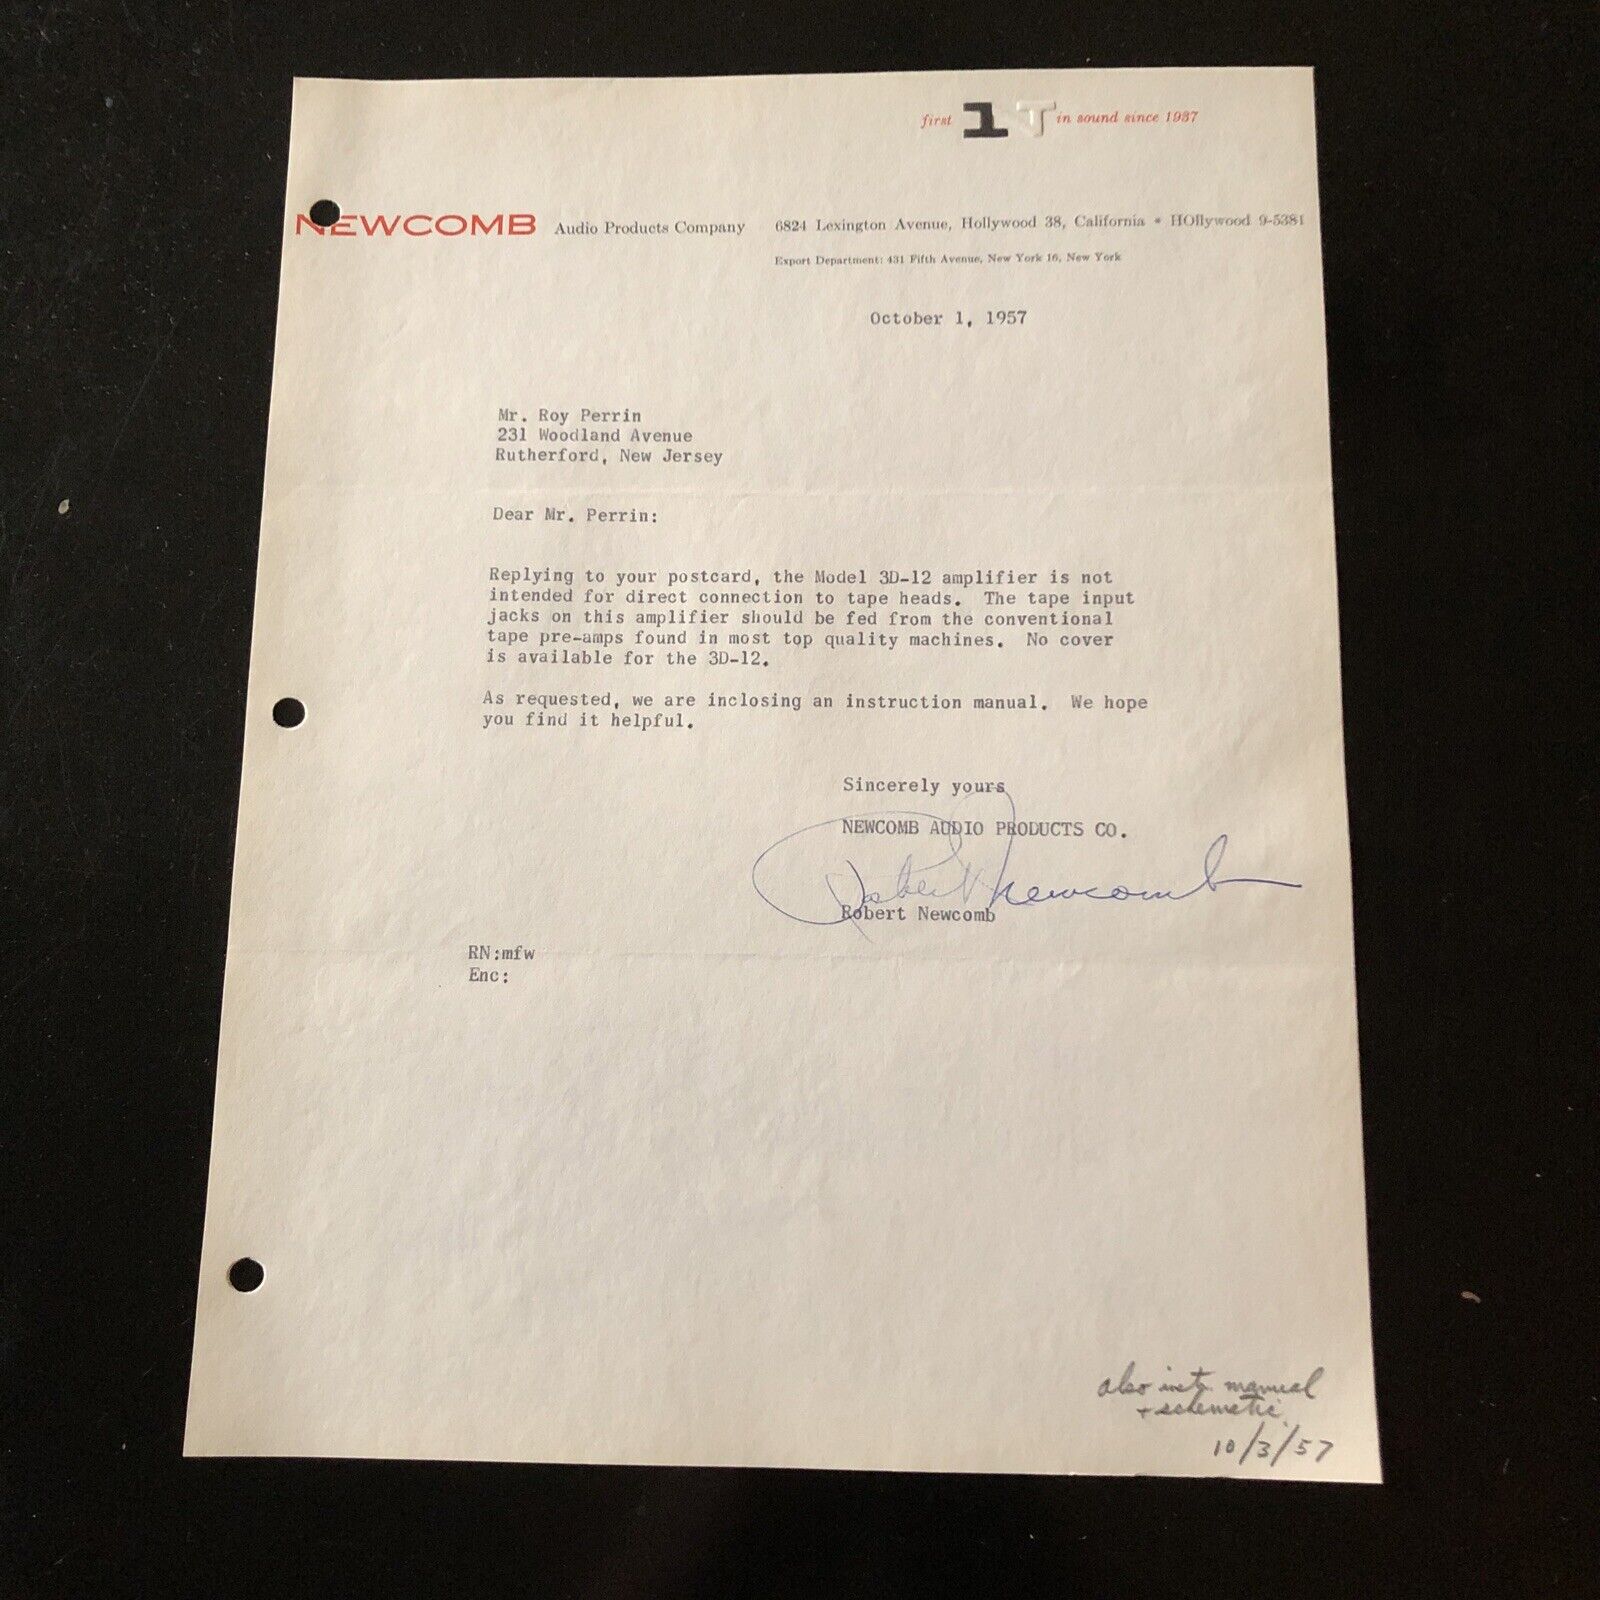 1957 NEWCOMB AUDIO Letterhead Stationery SIGNED ROBERT NEWCOMB 3D-12 Amp Mention